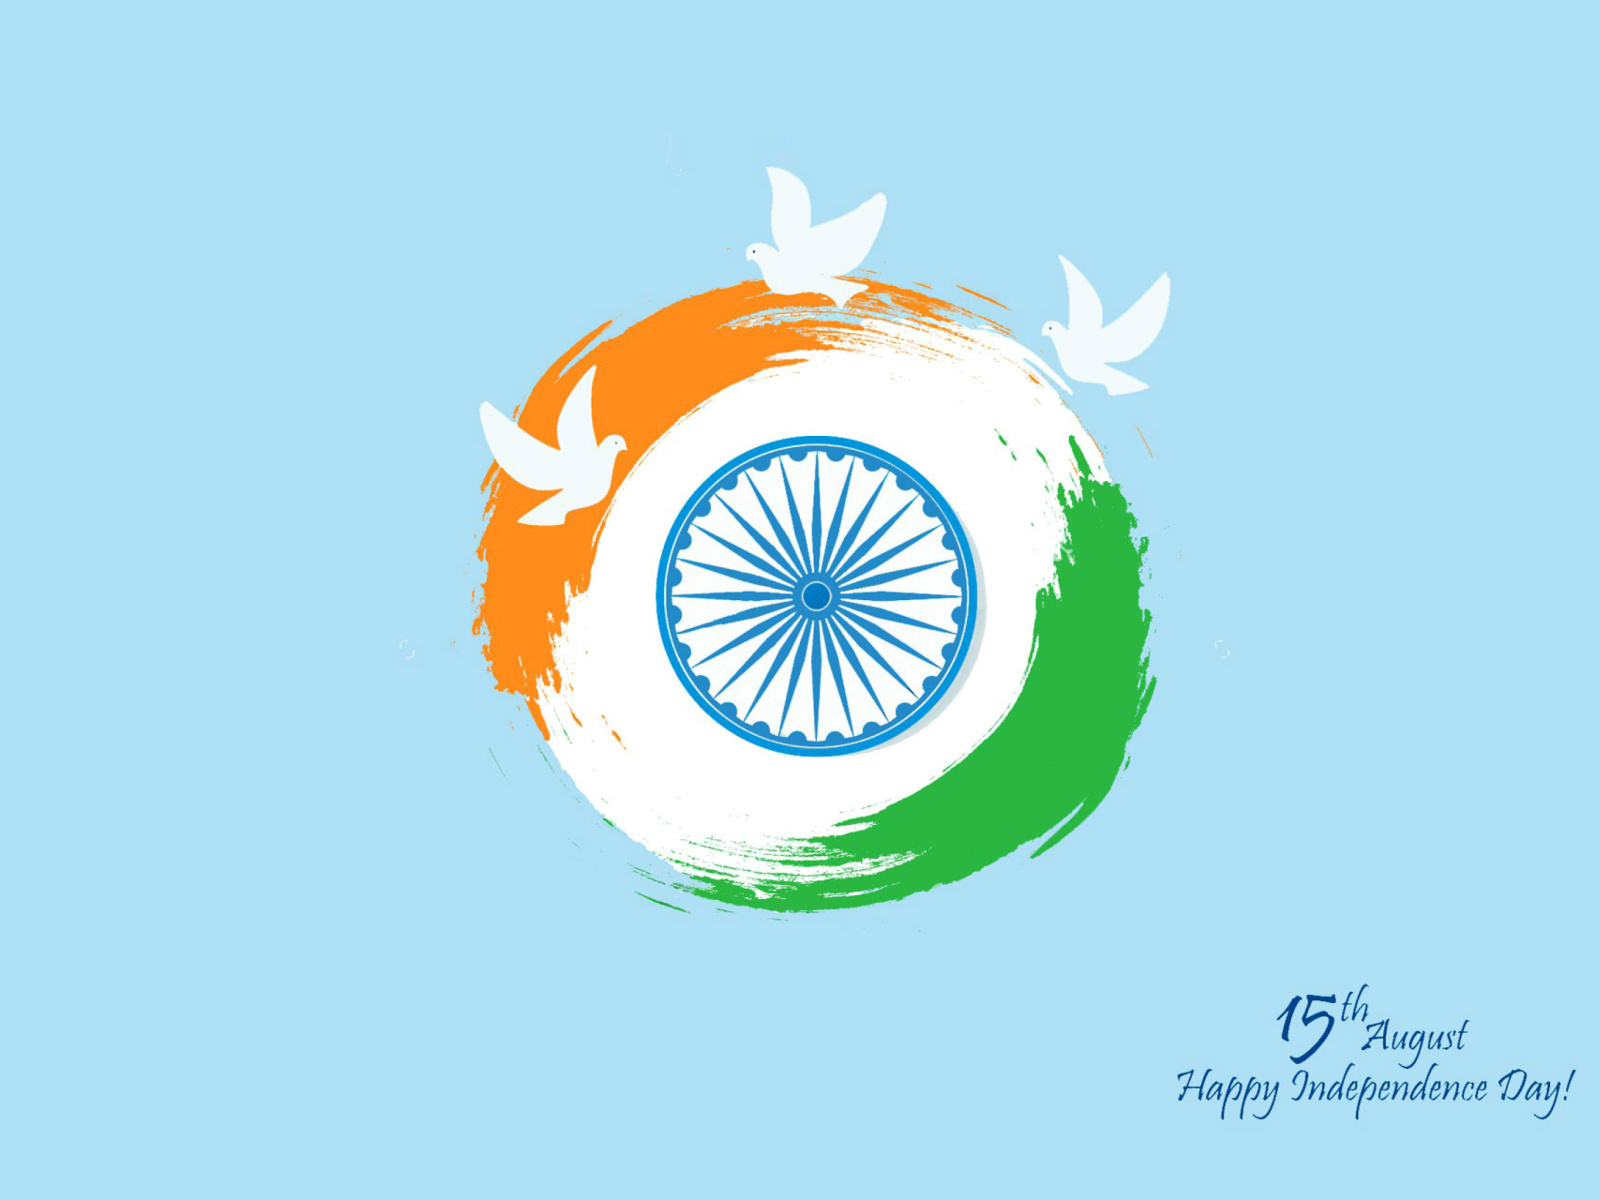 15th August Indian Independence Day screenshot #1 1600x1200